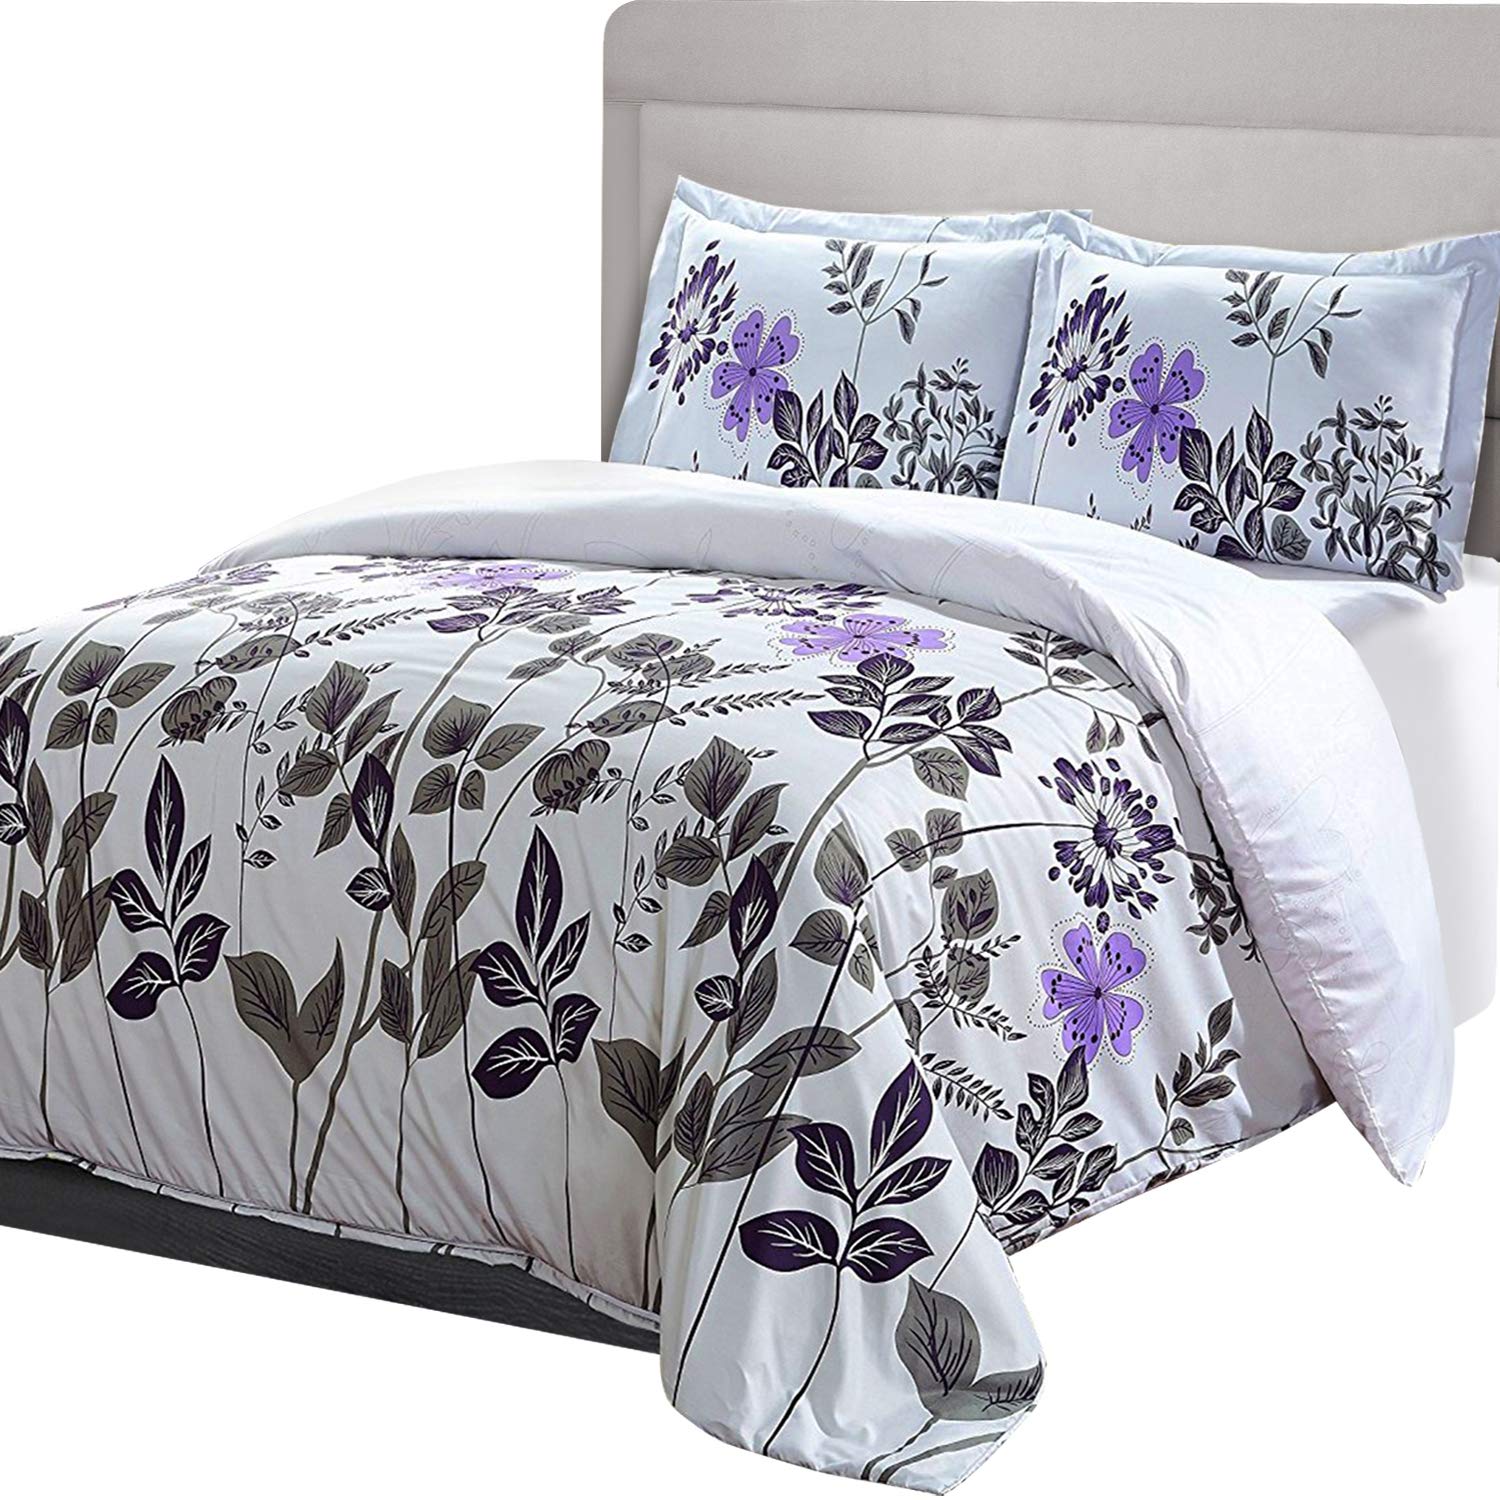 Book Cover Utopia Bedding 3pc Printed Duvet Cover Set with 2 Pillow Shams (Queen, Floral)